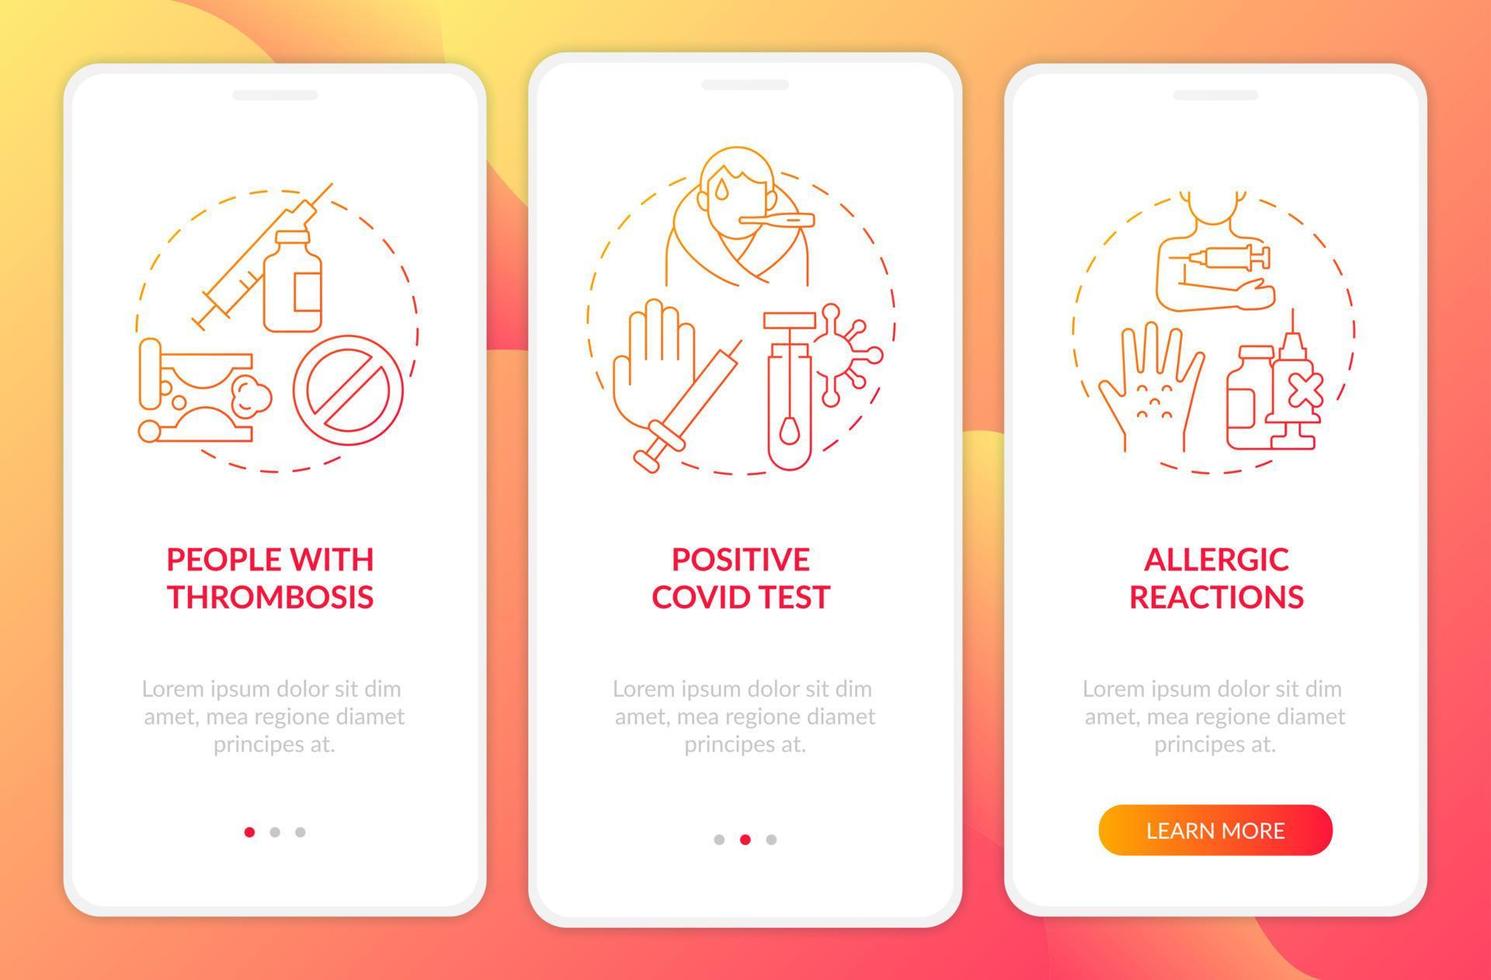 Reasons for medical exceptions onboarding mobile app page screen. Allergic reactions walkthrough 3 steps graphic instructions with concepts. UI, UX, GUI vector template with linear color illustrations